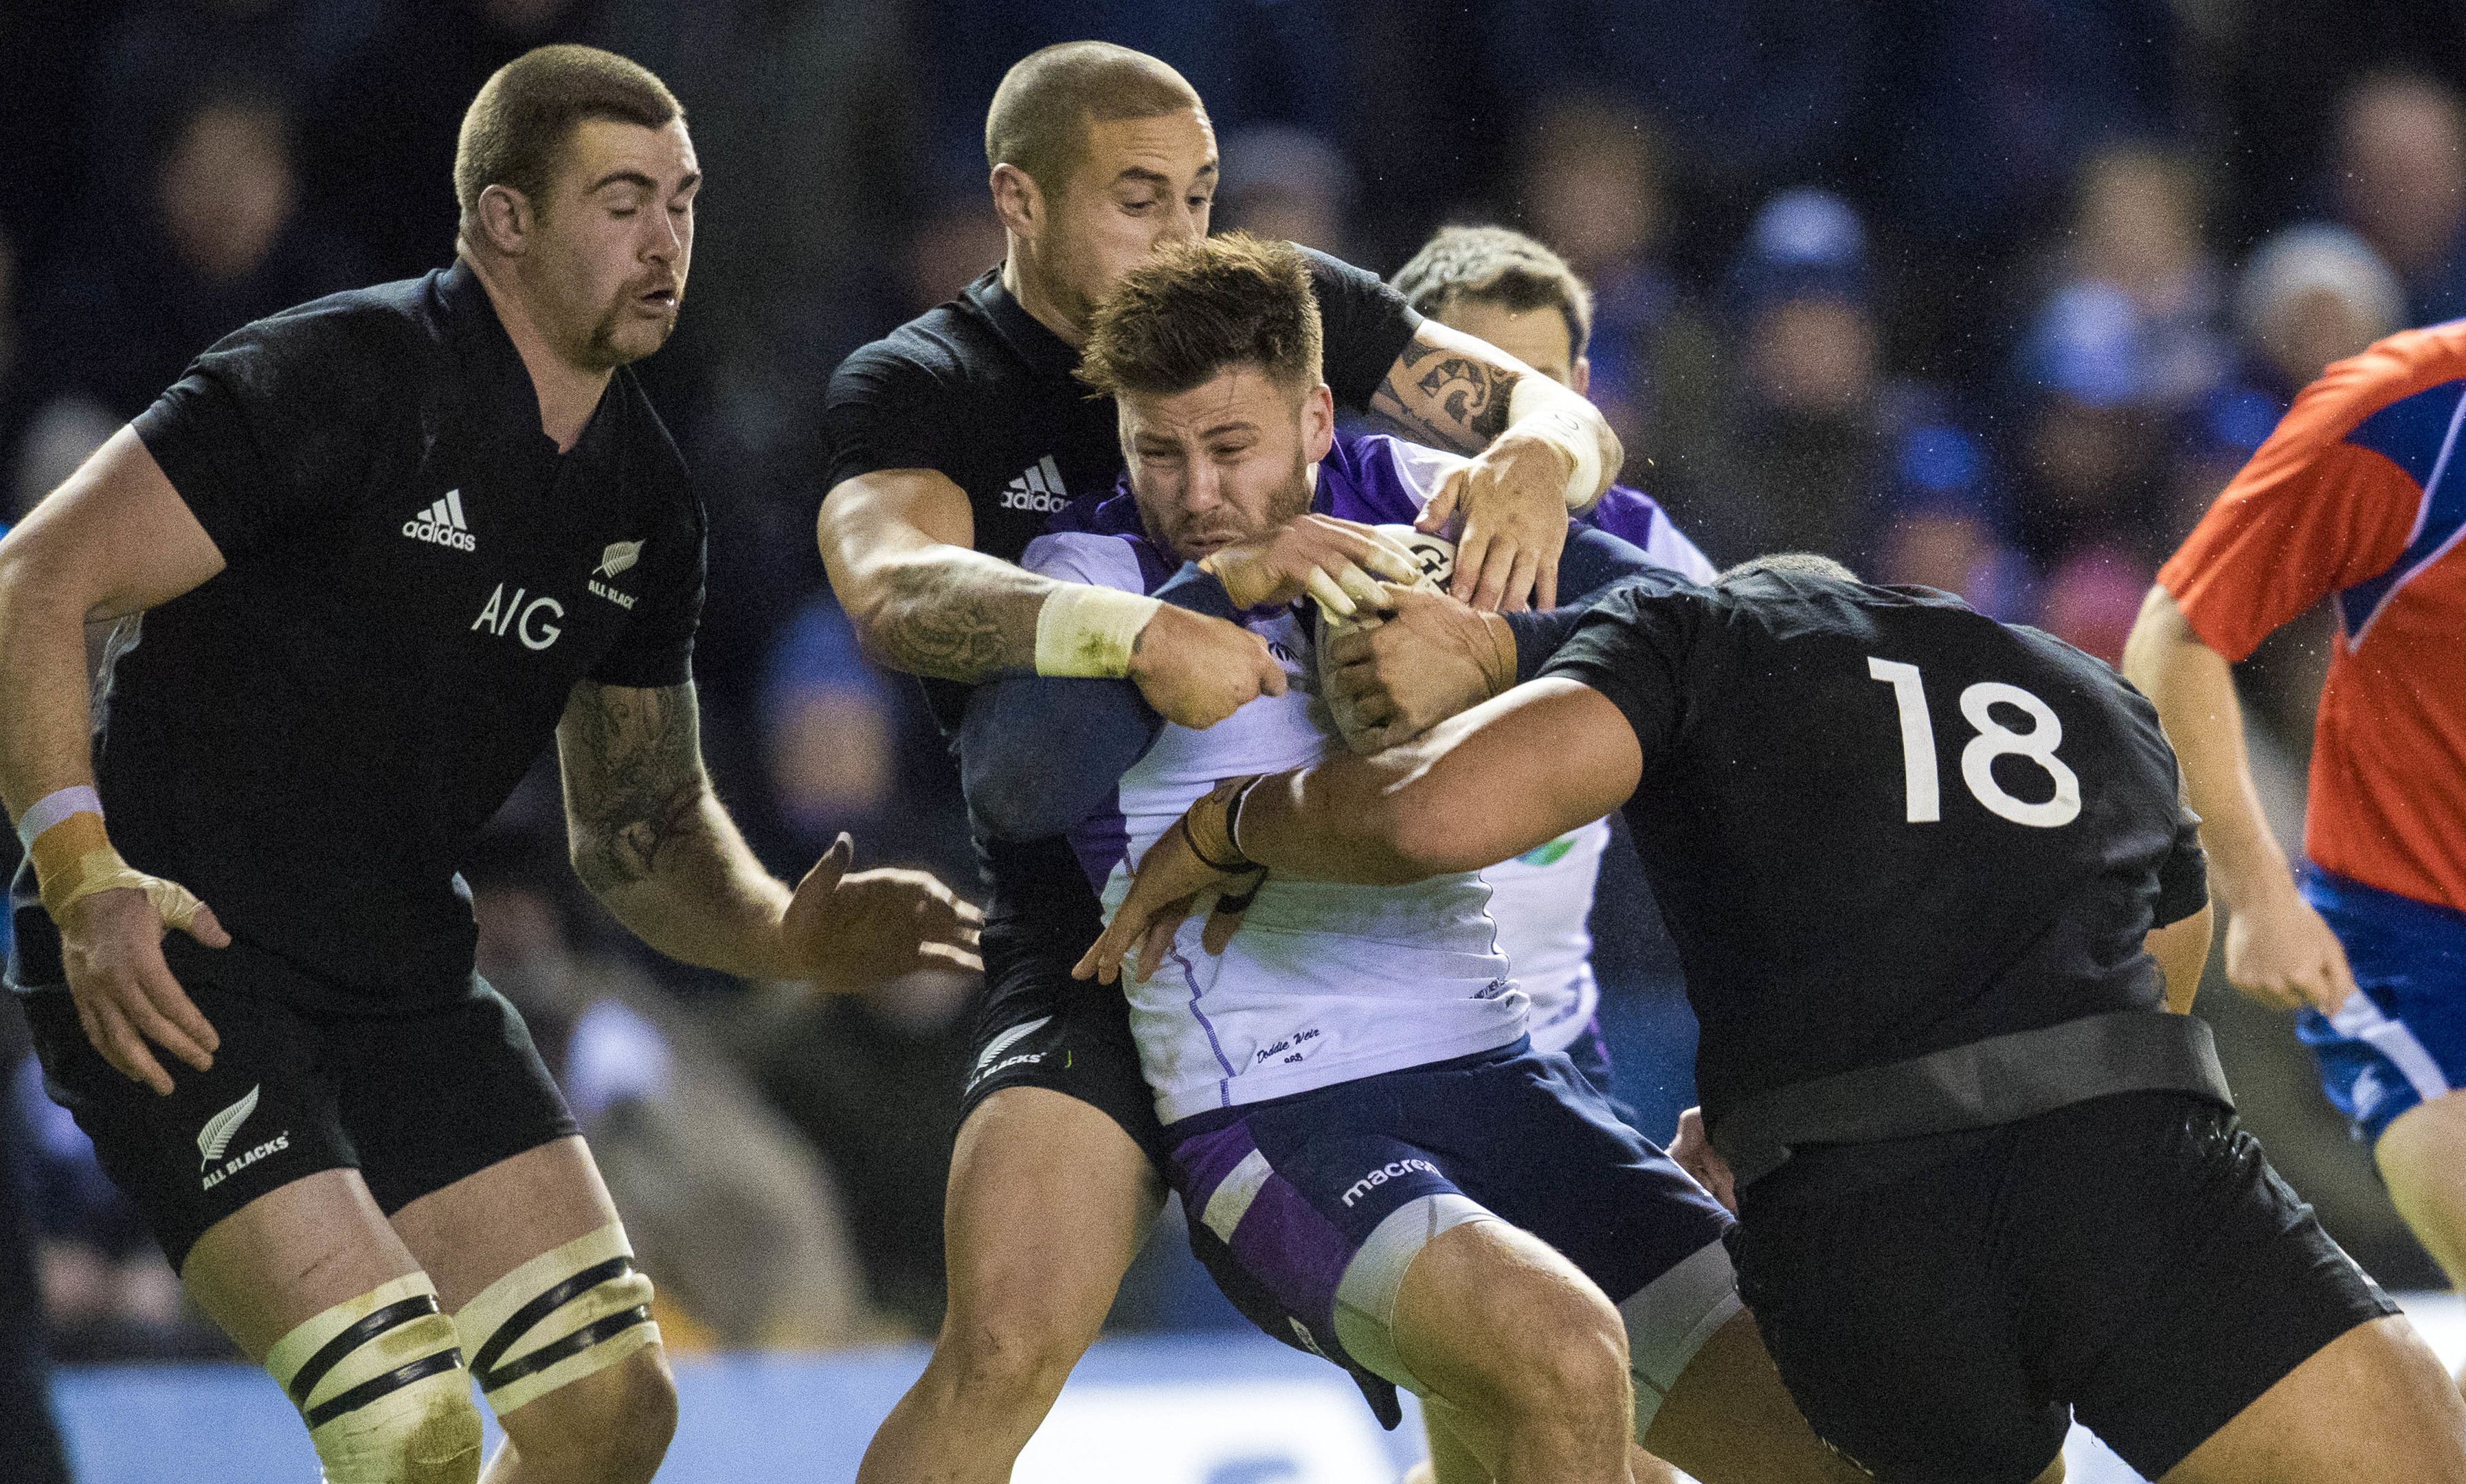 "Little guy" Ali Price battles through three All Blacks during the game at Murrayfield.